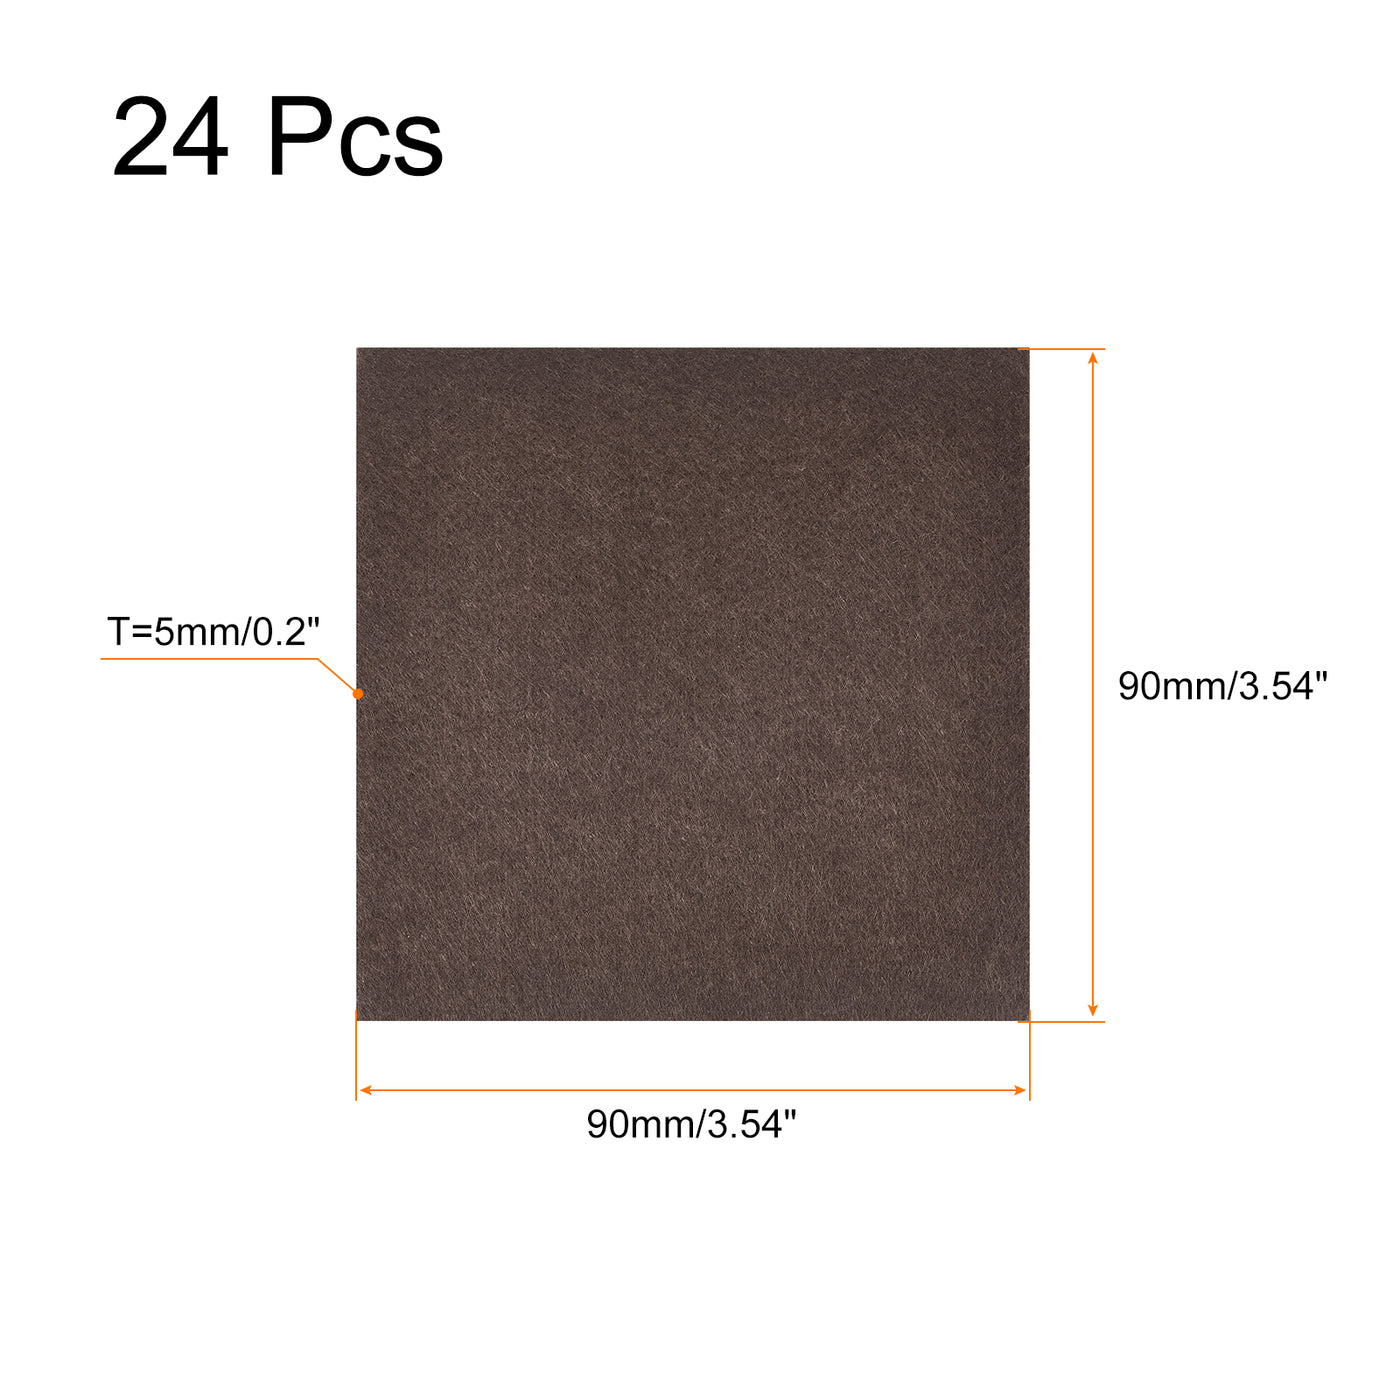 uxcell Uxcell Felt Furniture Pads, 90mm x 90mm Self Adhesive Square Floor Protectors for Furniture Legs Hardwood Floor, Brown 24Pcs